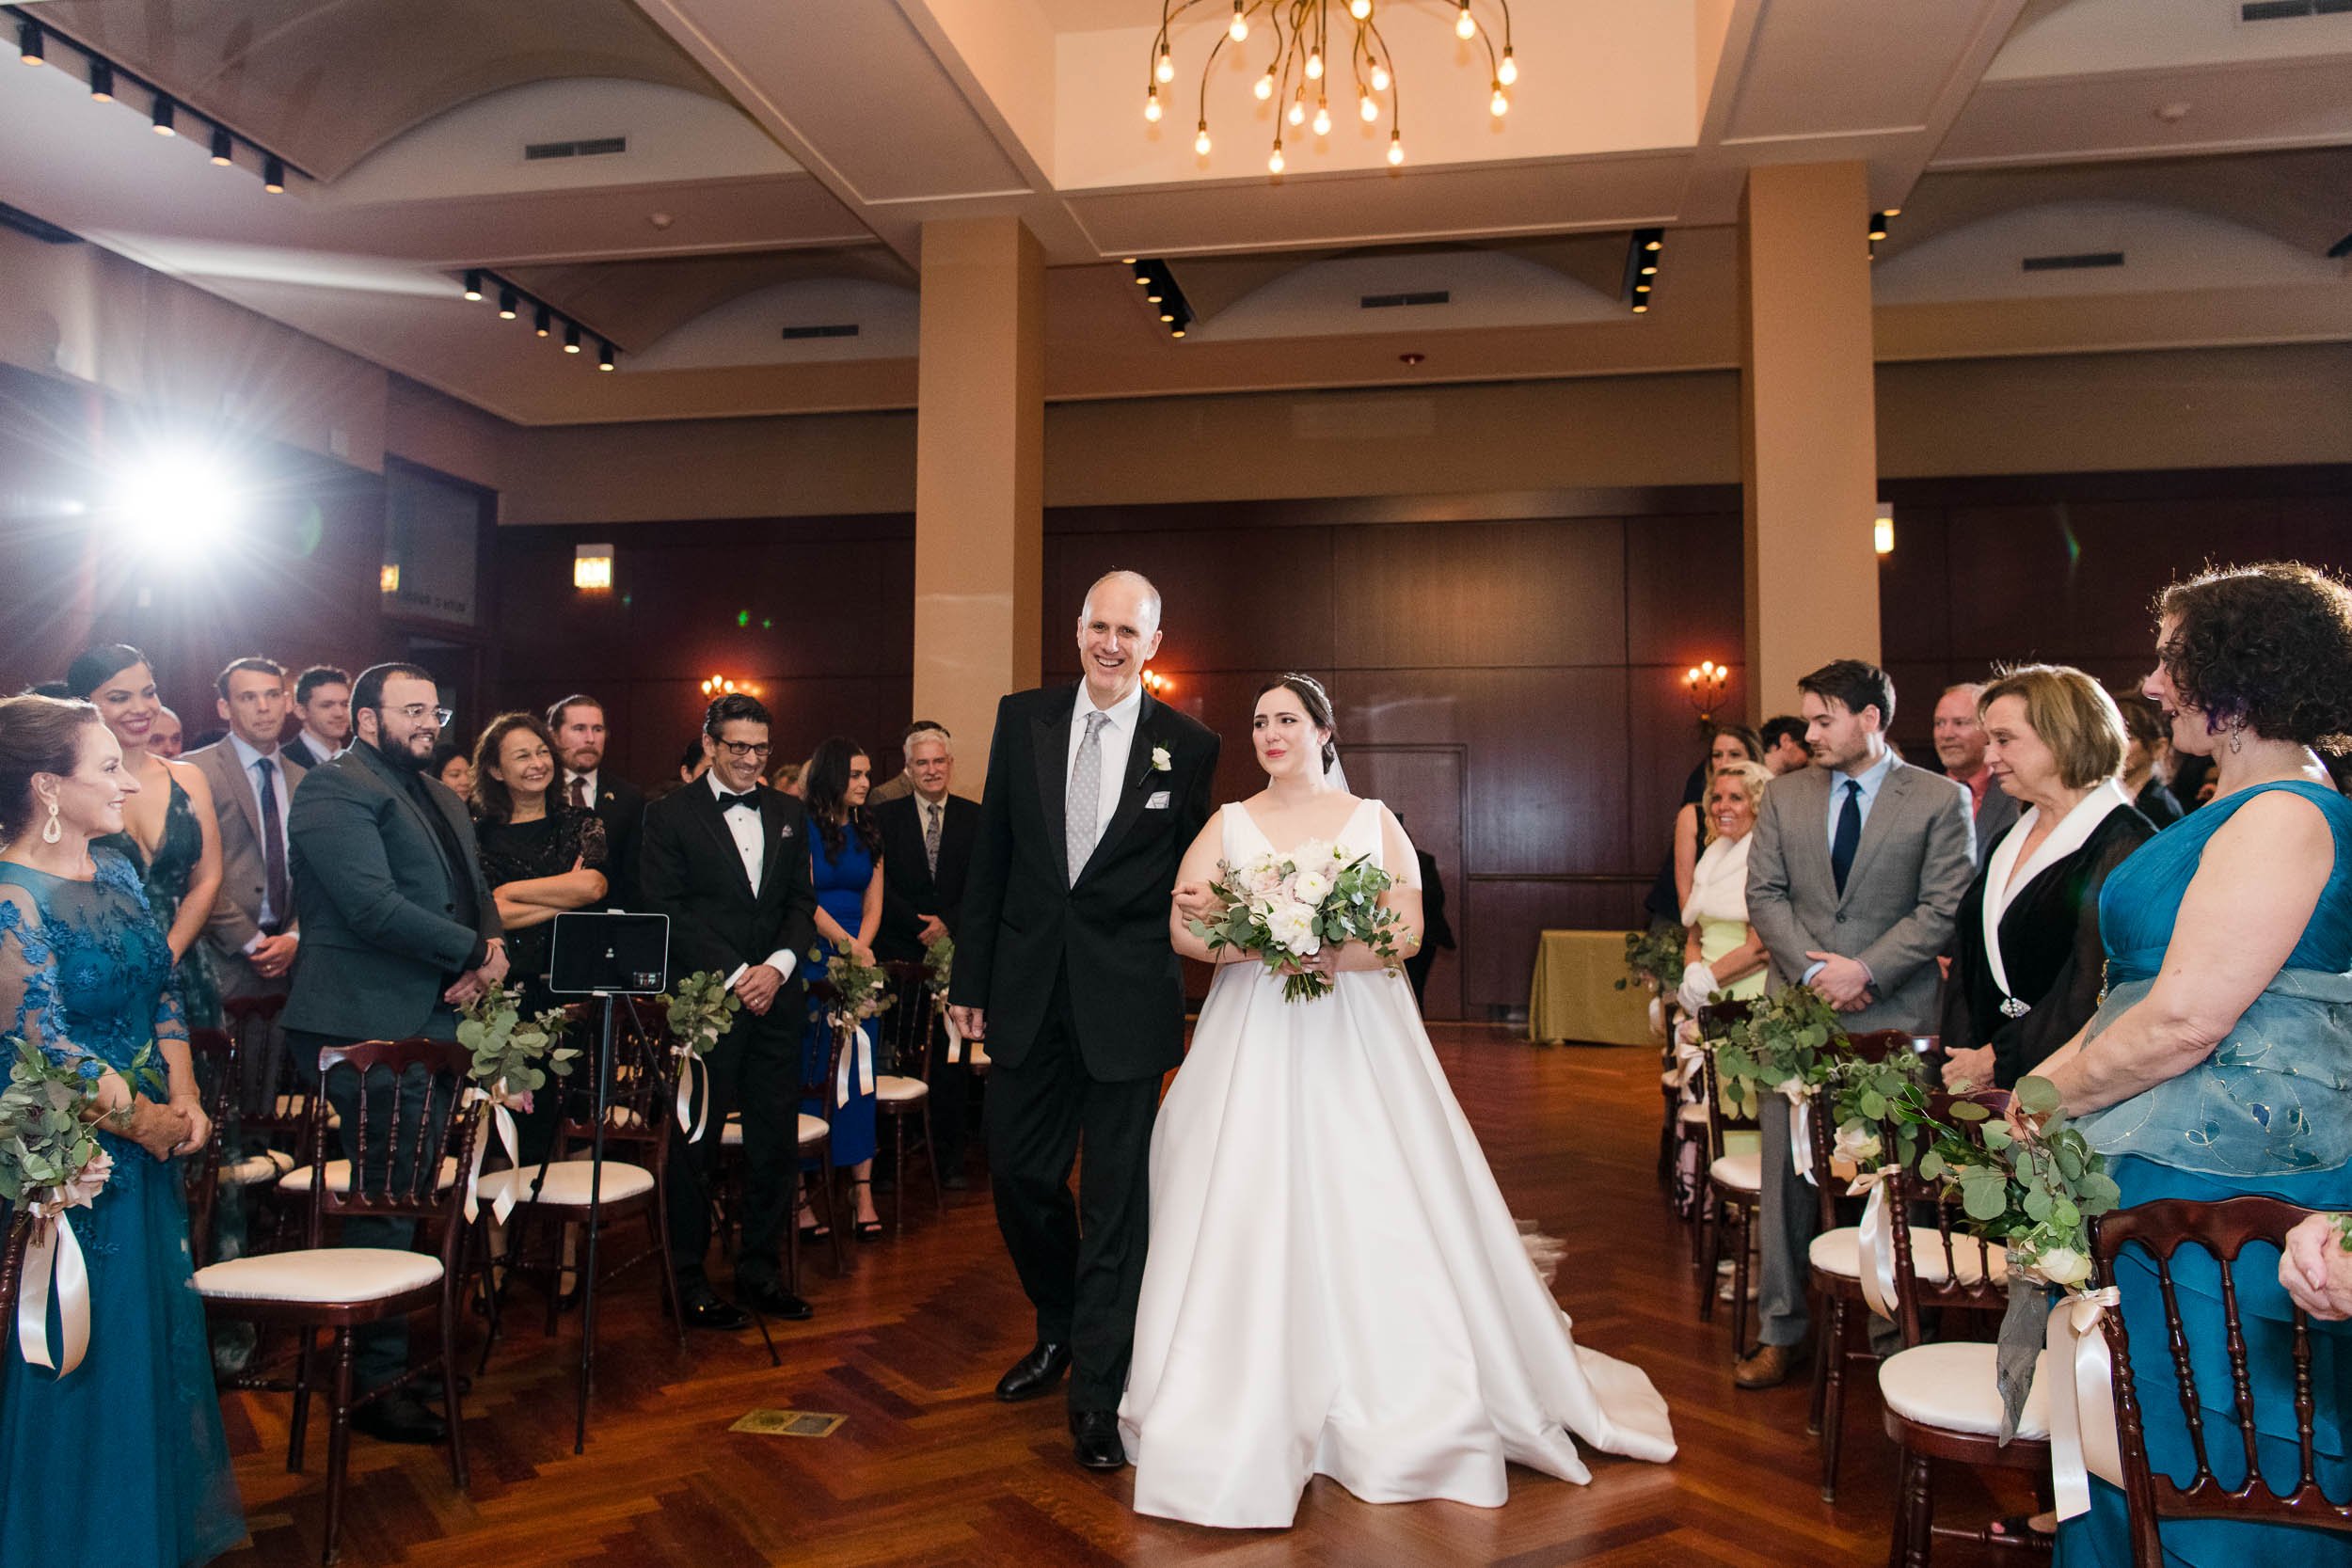 Wedding Day Photos | Newberry Library | J. Brown Photography | bride walks down aisle.  